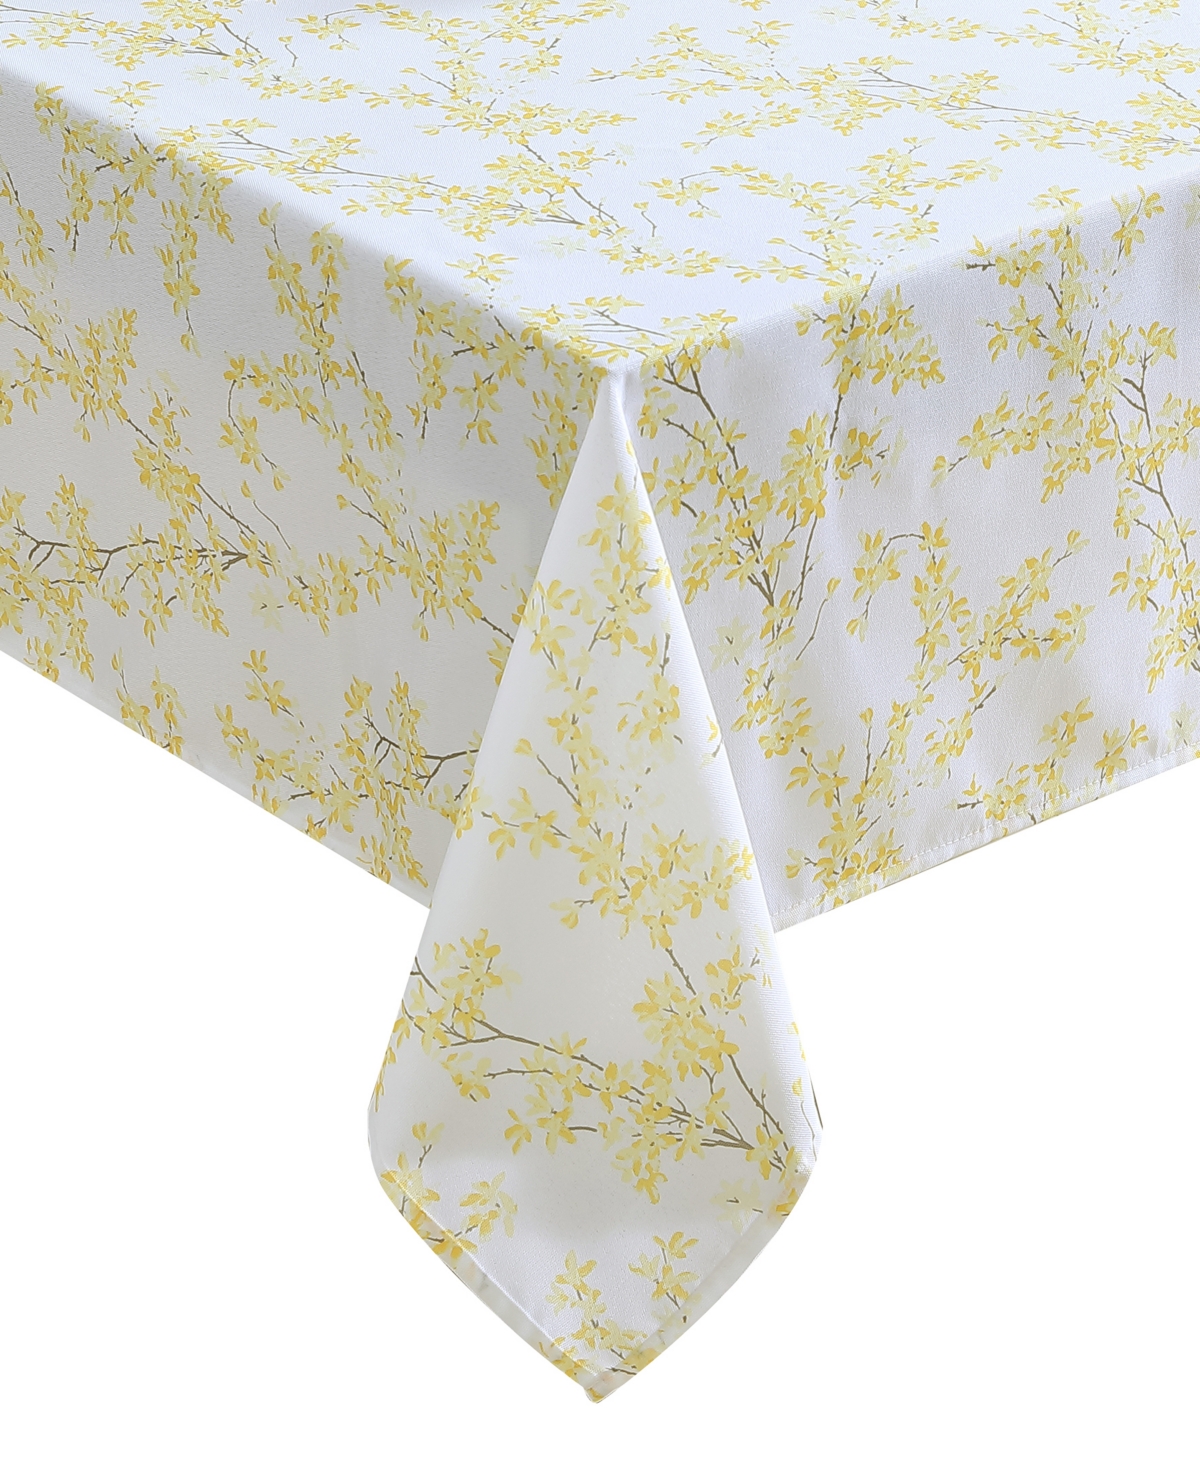 LAURA ASHLEY EASY CARE TABLECLOTH, 60" X 84", SERVICE FOR 6